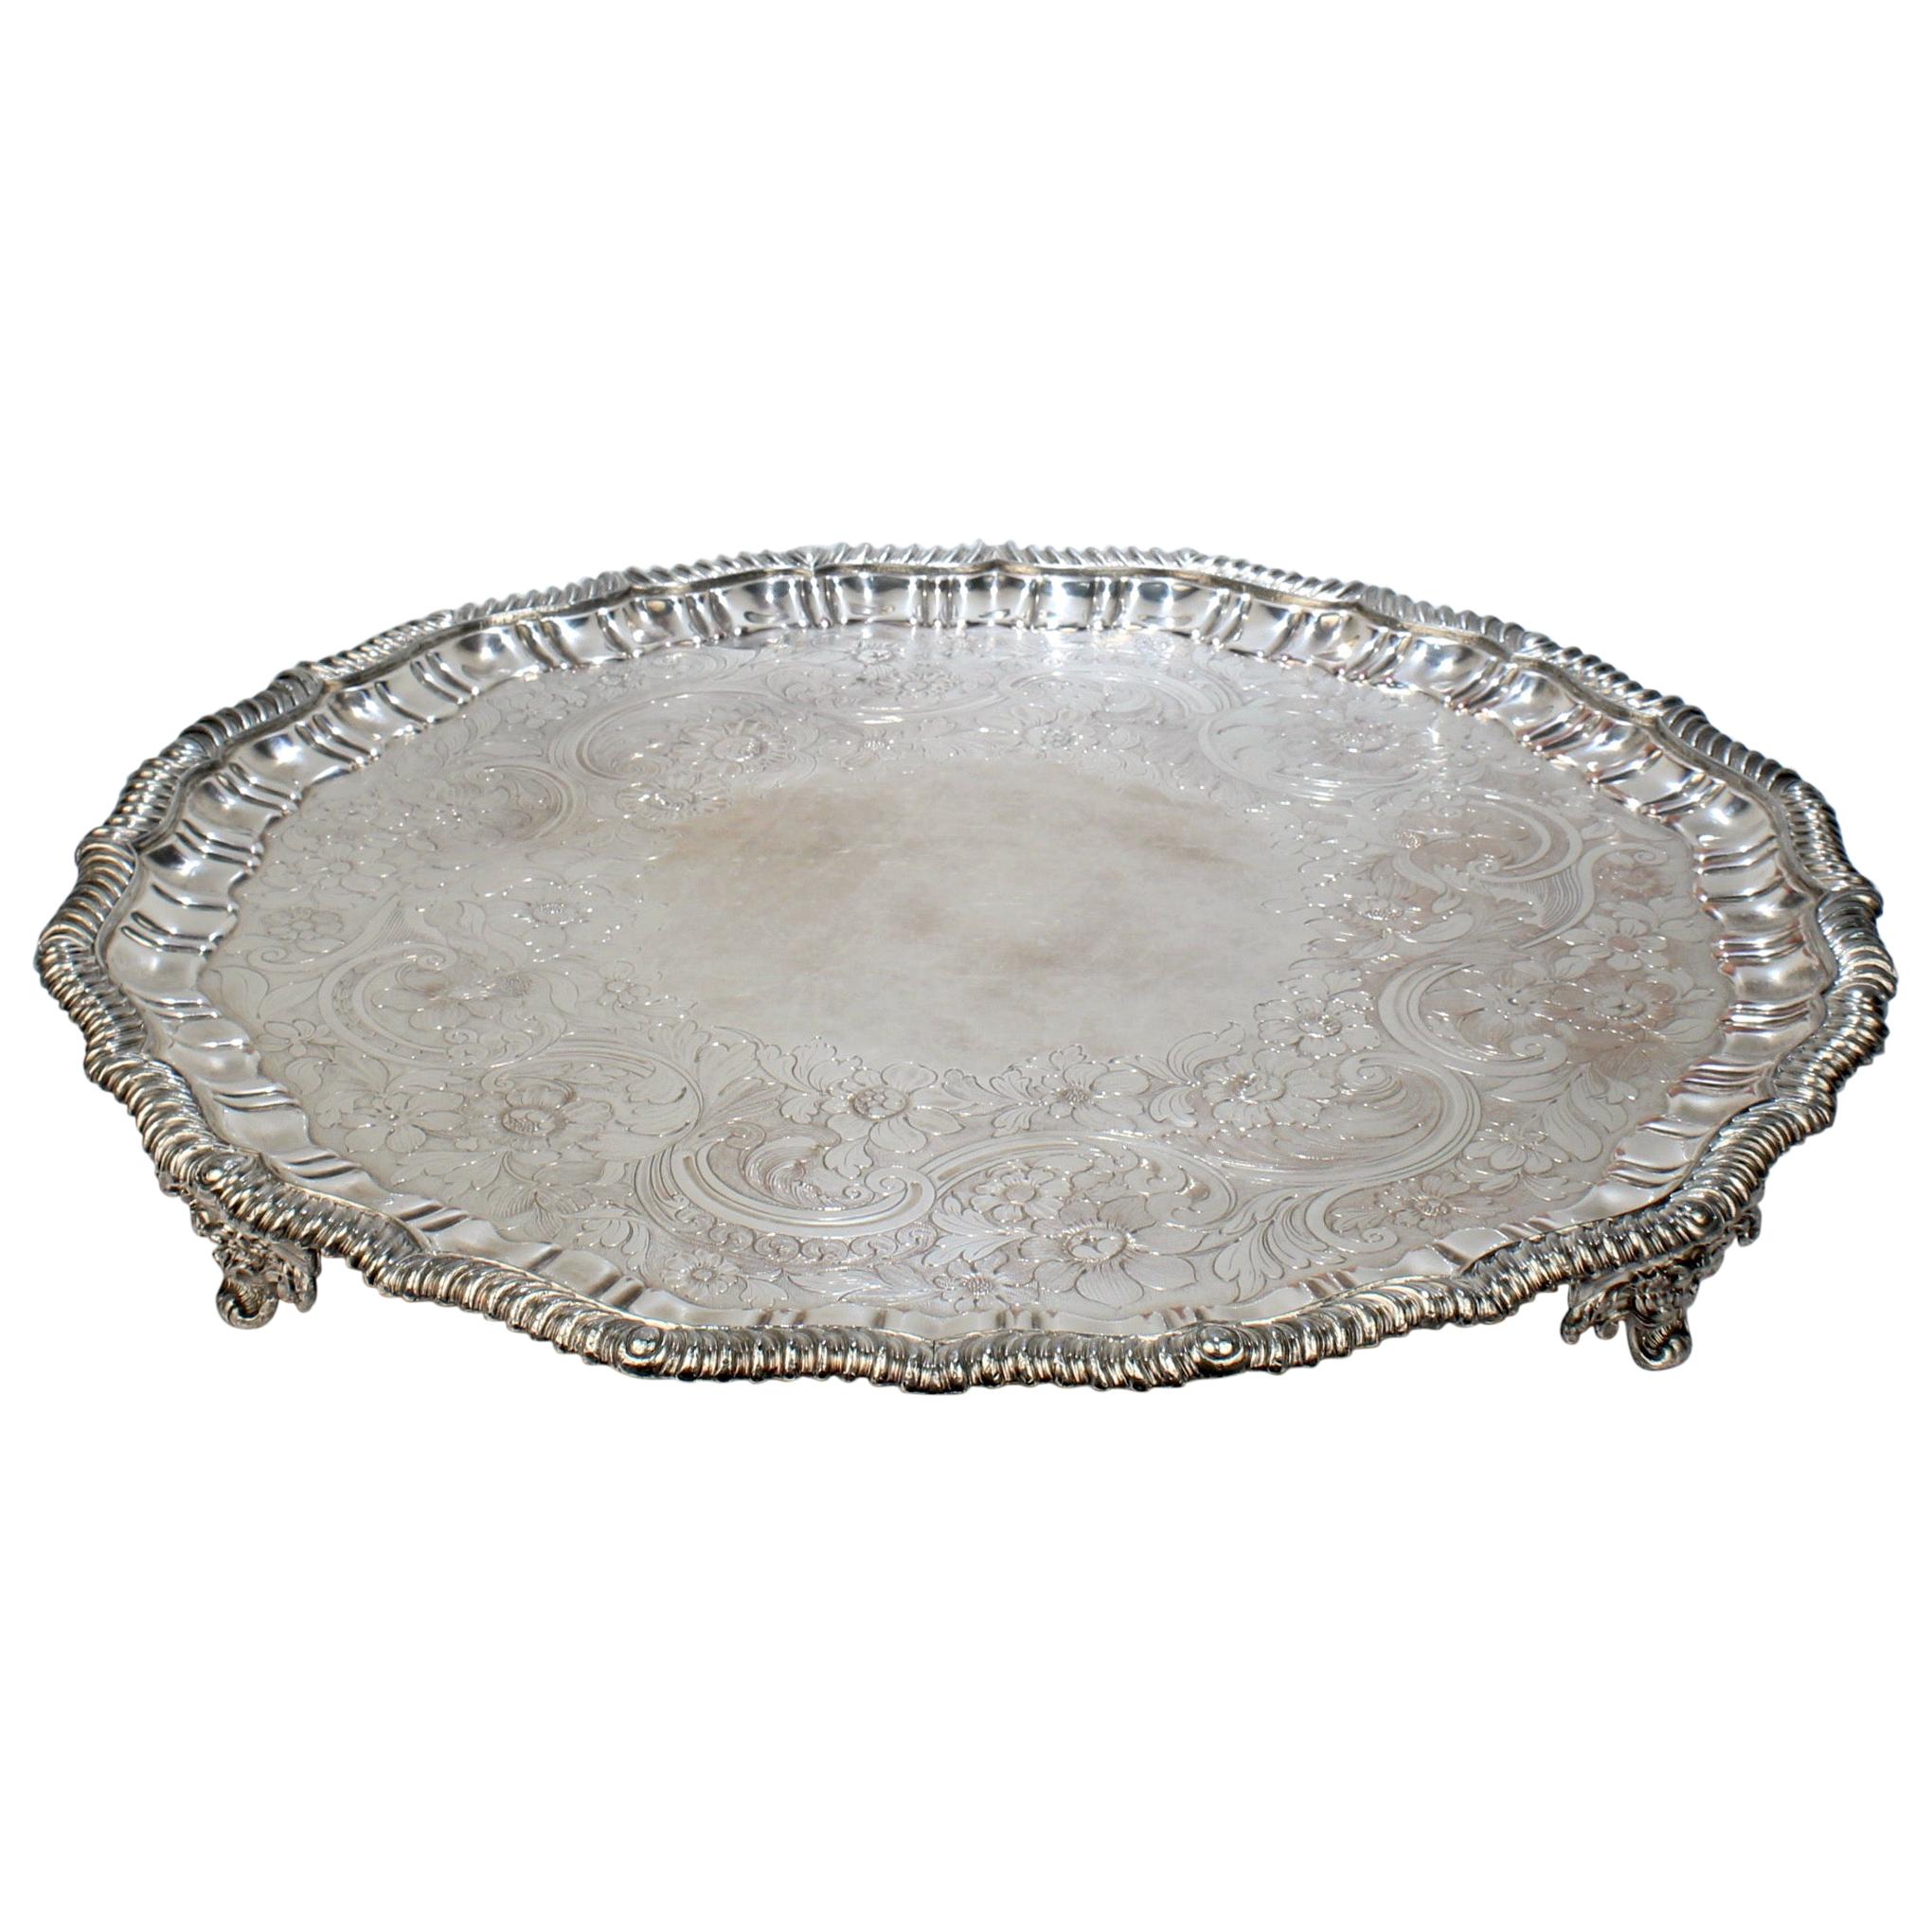 Very Large Antique Victorian Period Sheffield Silver Plate Salver or Round Tray